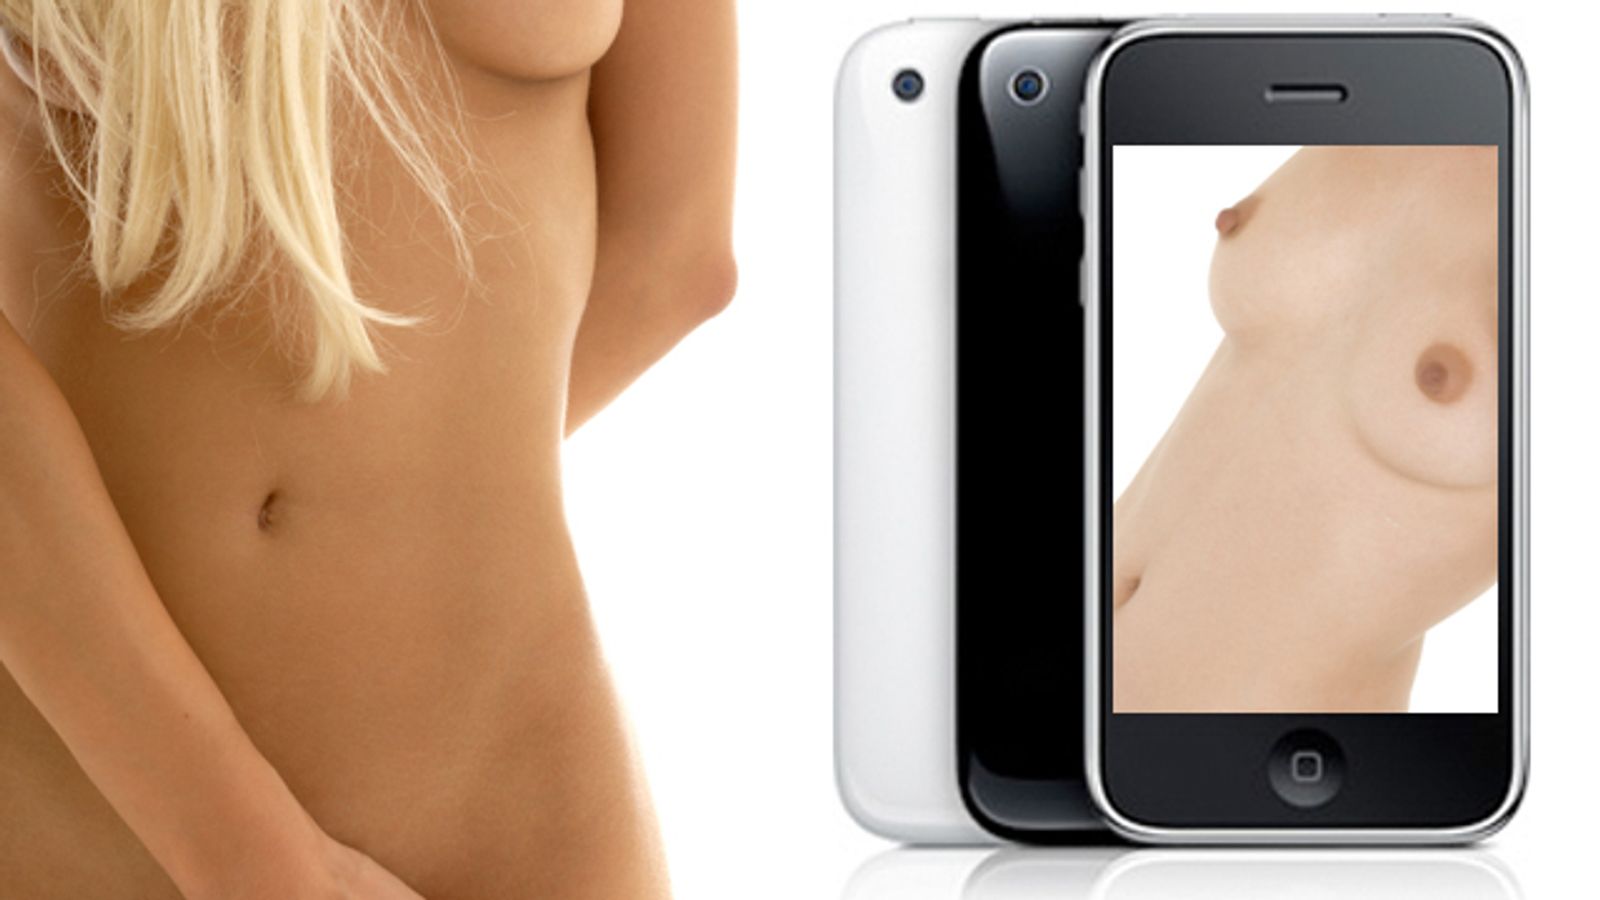 Nude Teen Pic Appears in iPhone App